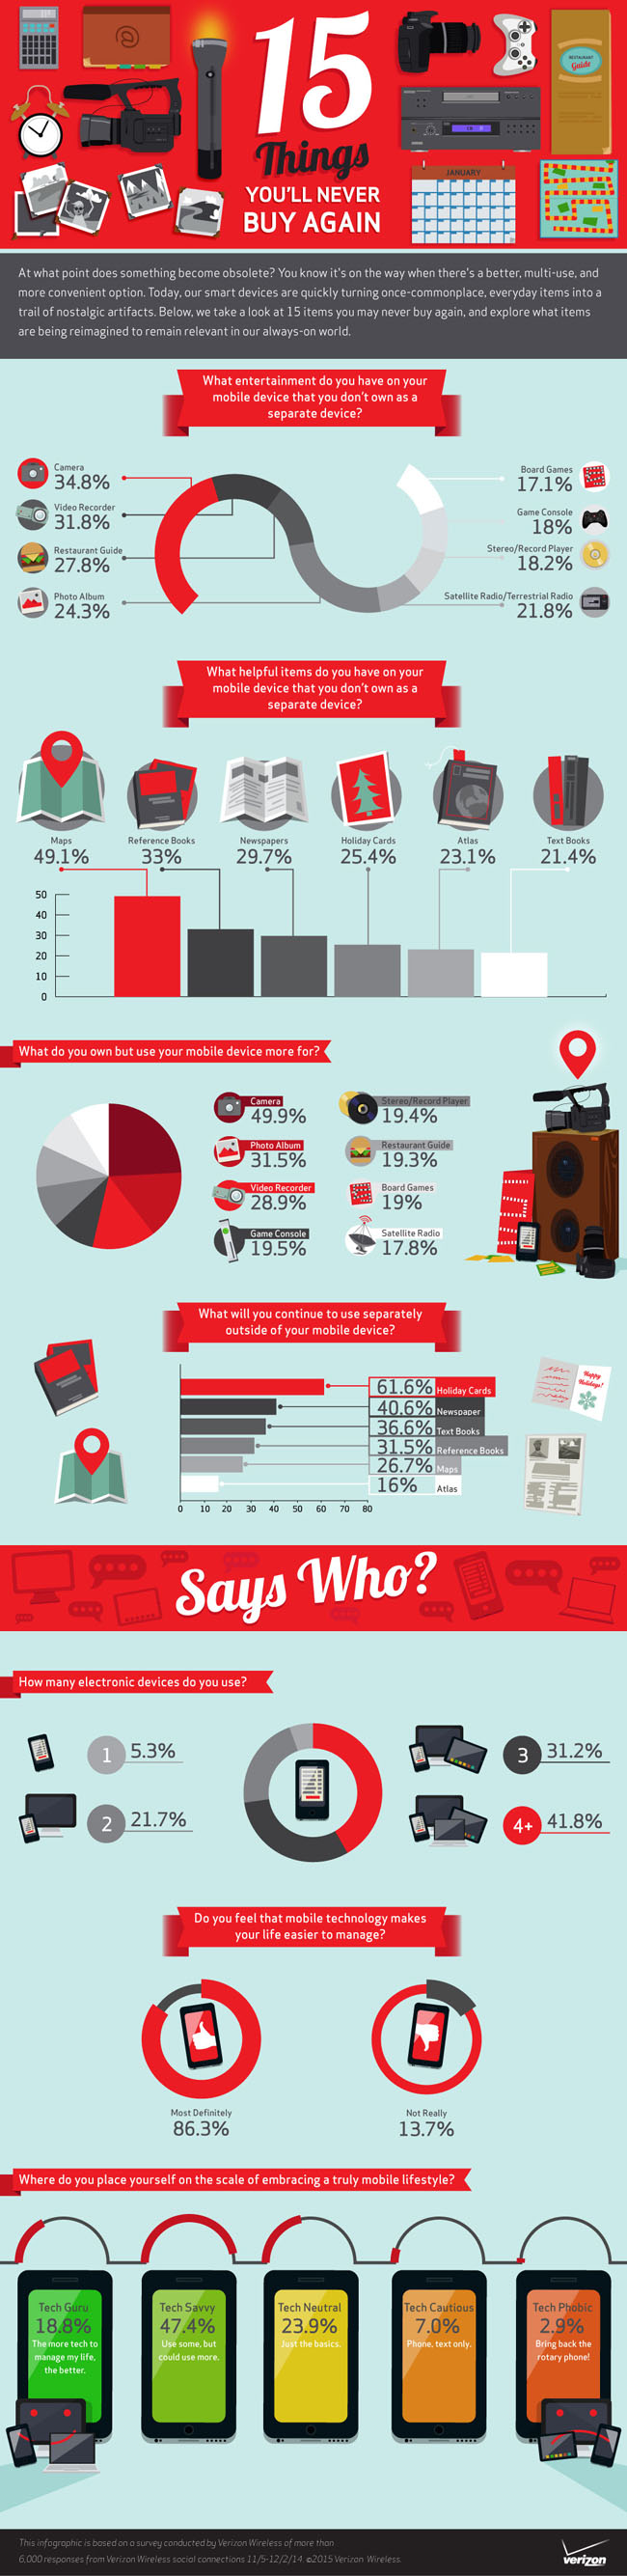 Technology | Infographic from Verizon Wireless about 15 Things You’ll Never Buy Again. Do you agree with it? 